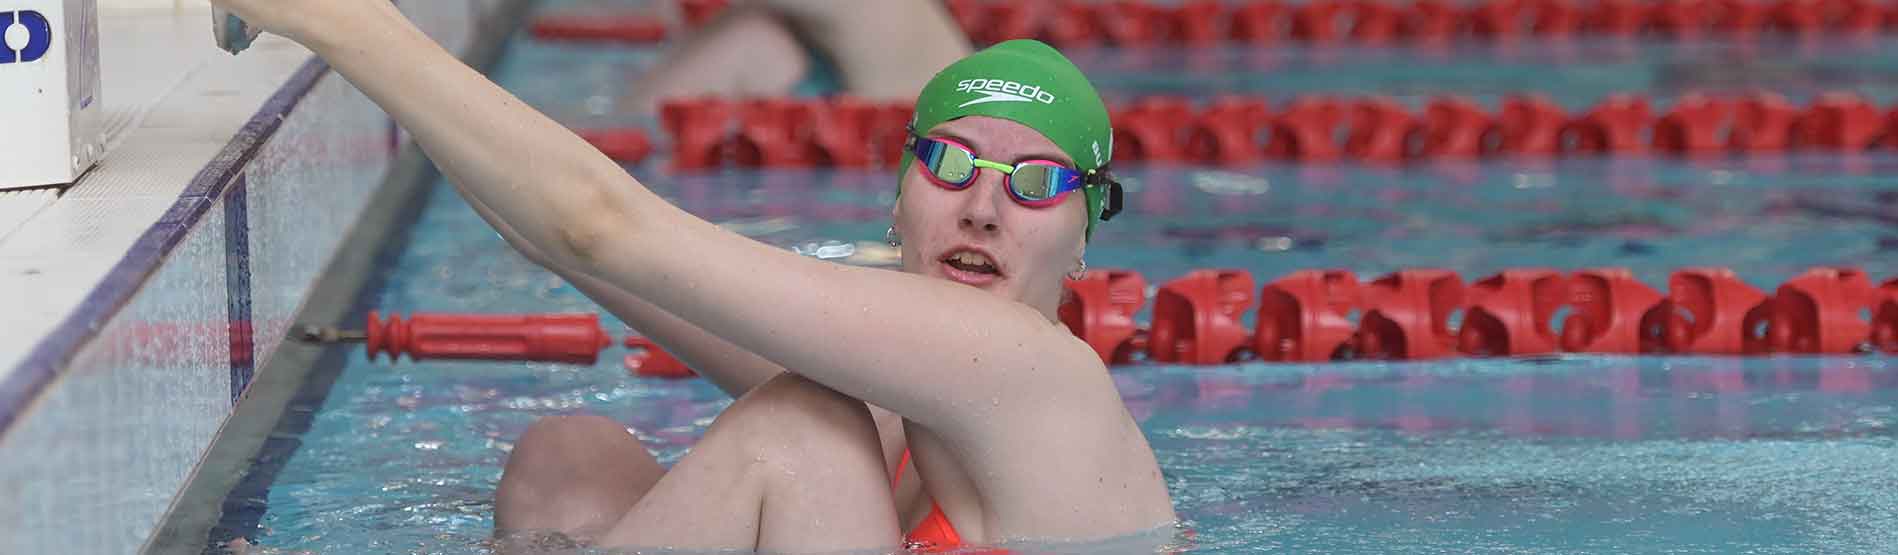 Swansea University student swimmer in pool at Wales National Pool